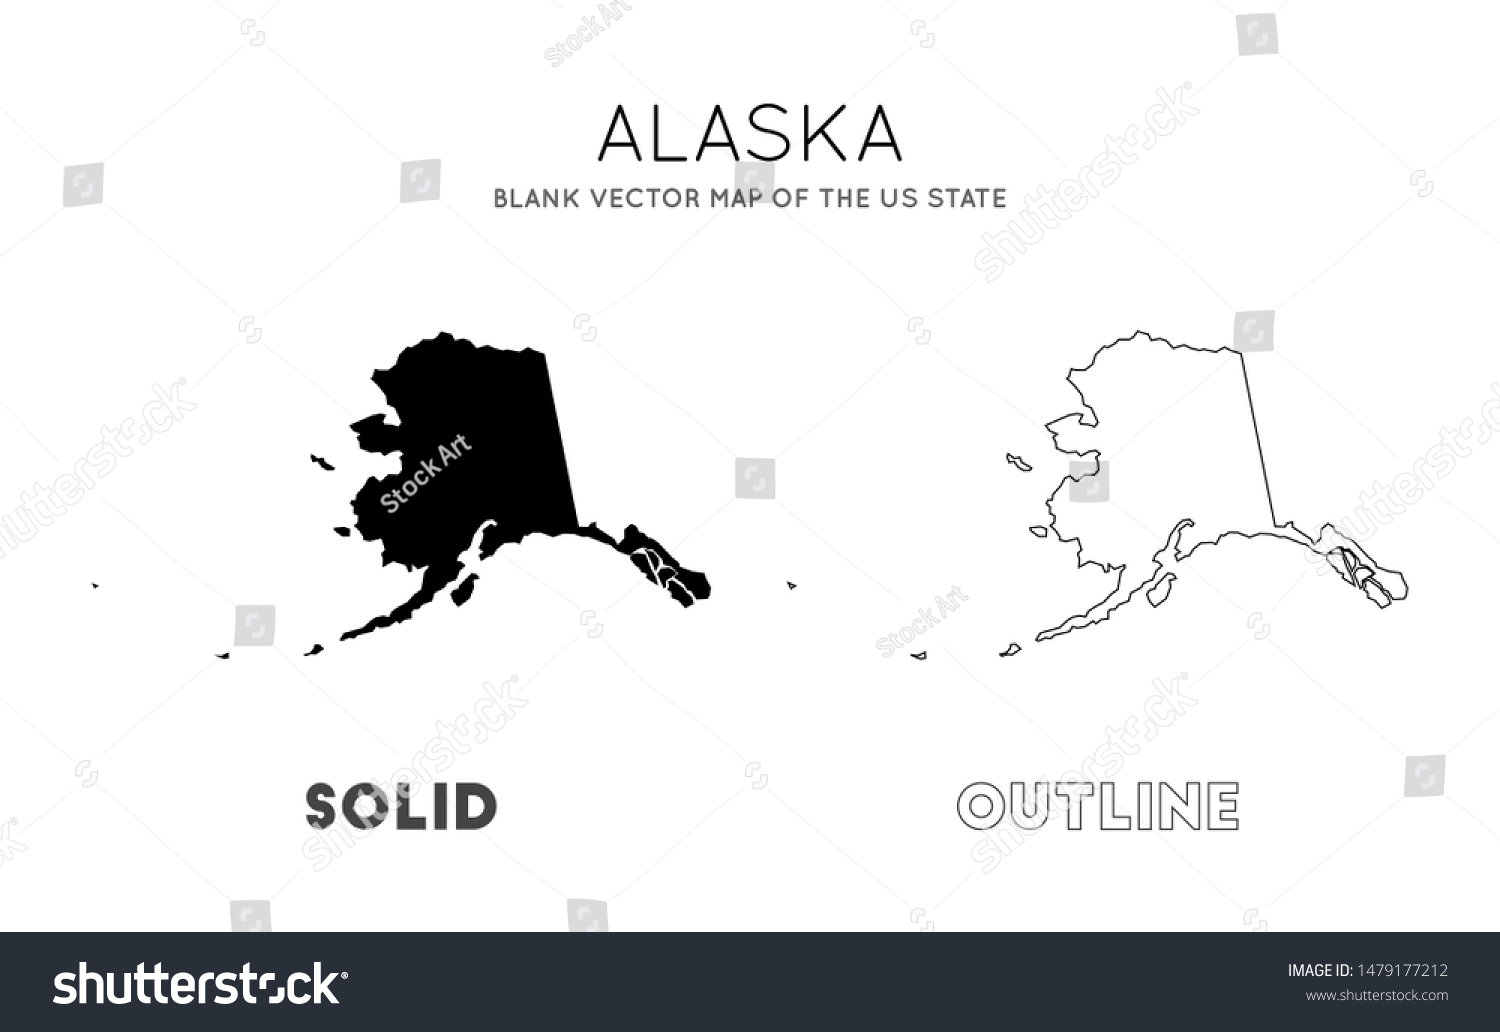 Alaska Map Blank Vector Map Of The Us State Royalty Free Stock Vector 1479177212 0196